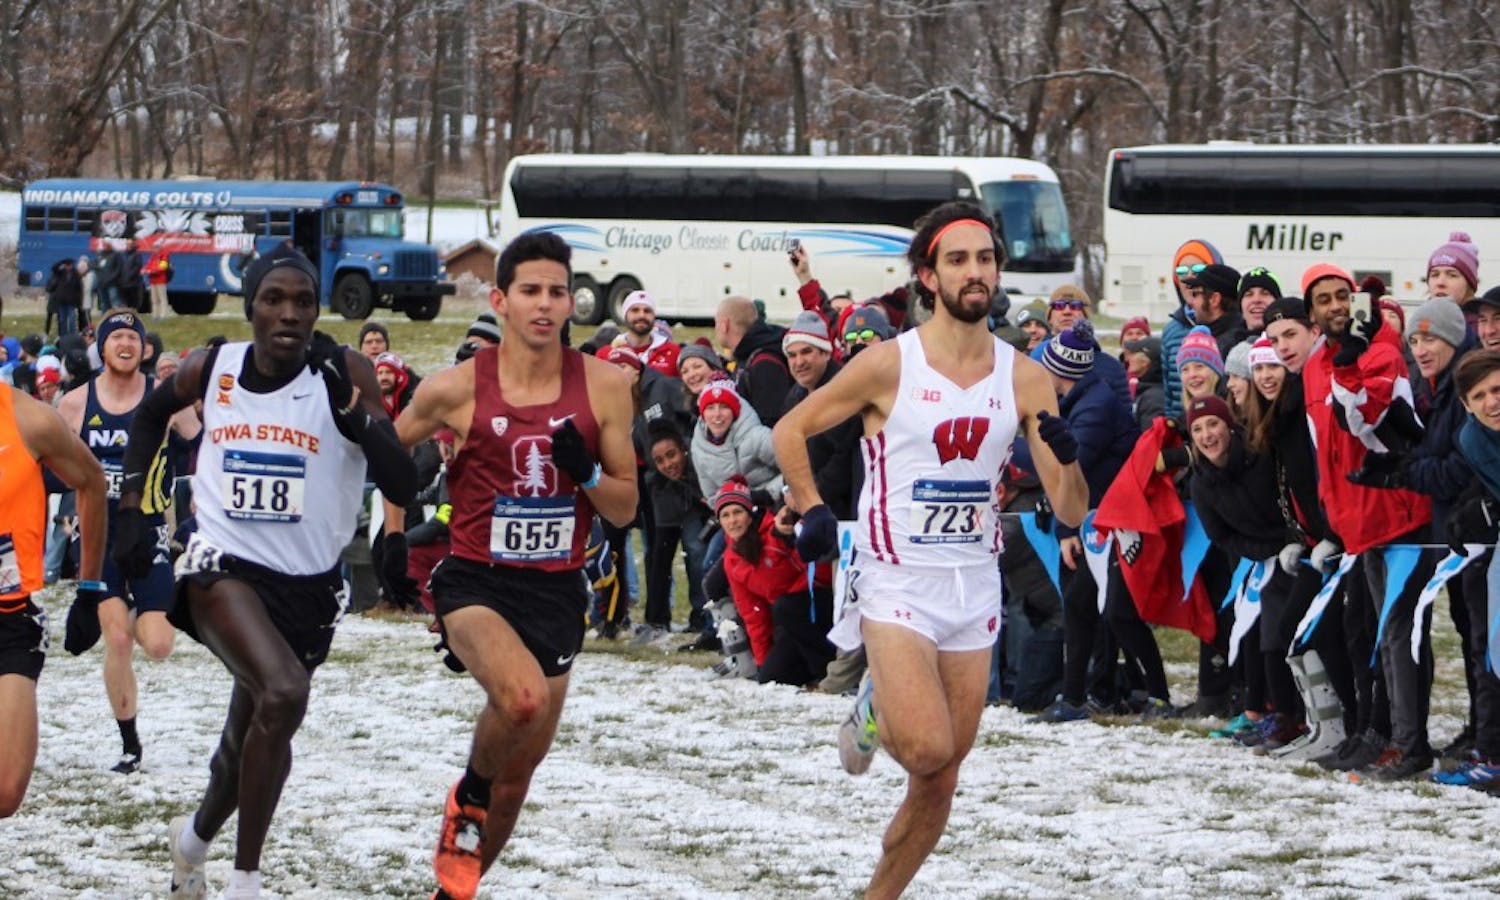 Gallery: 2018 NCAA Cross Country Championships